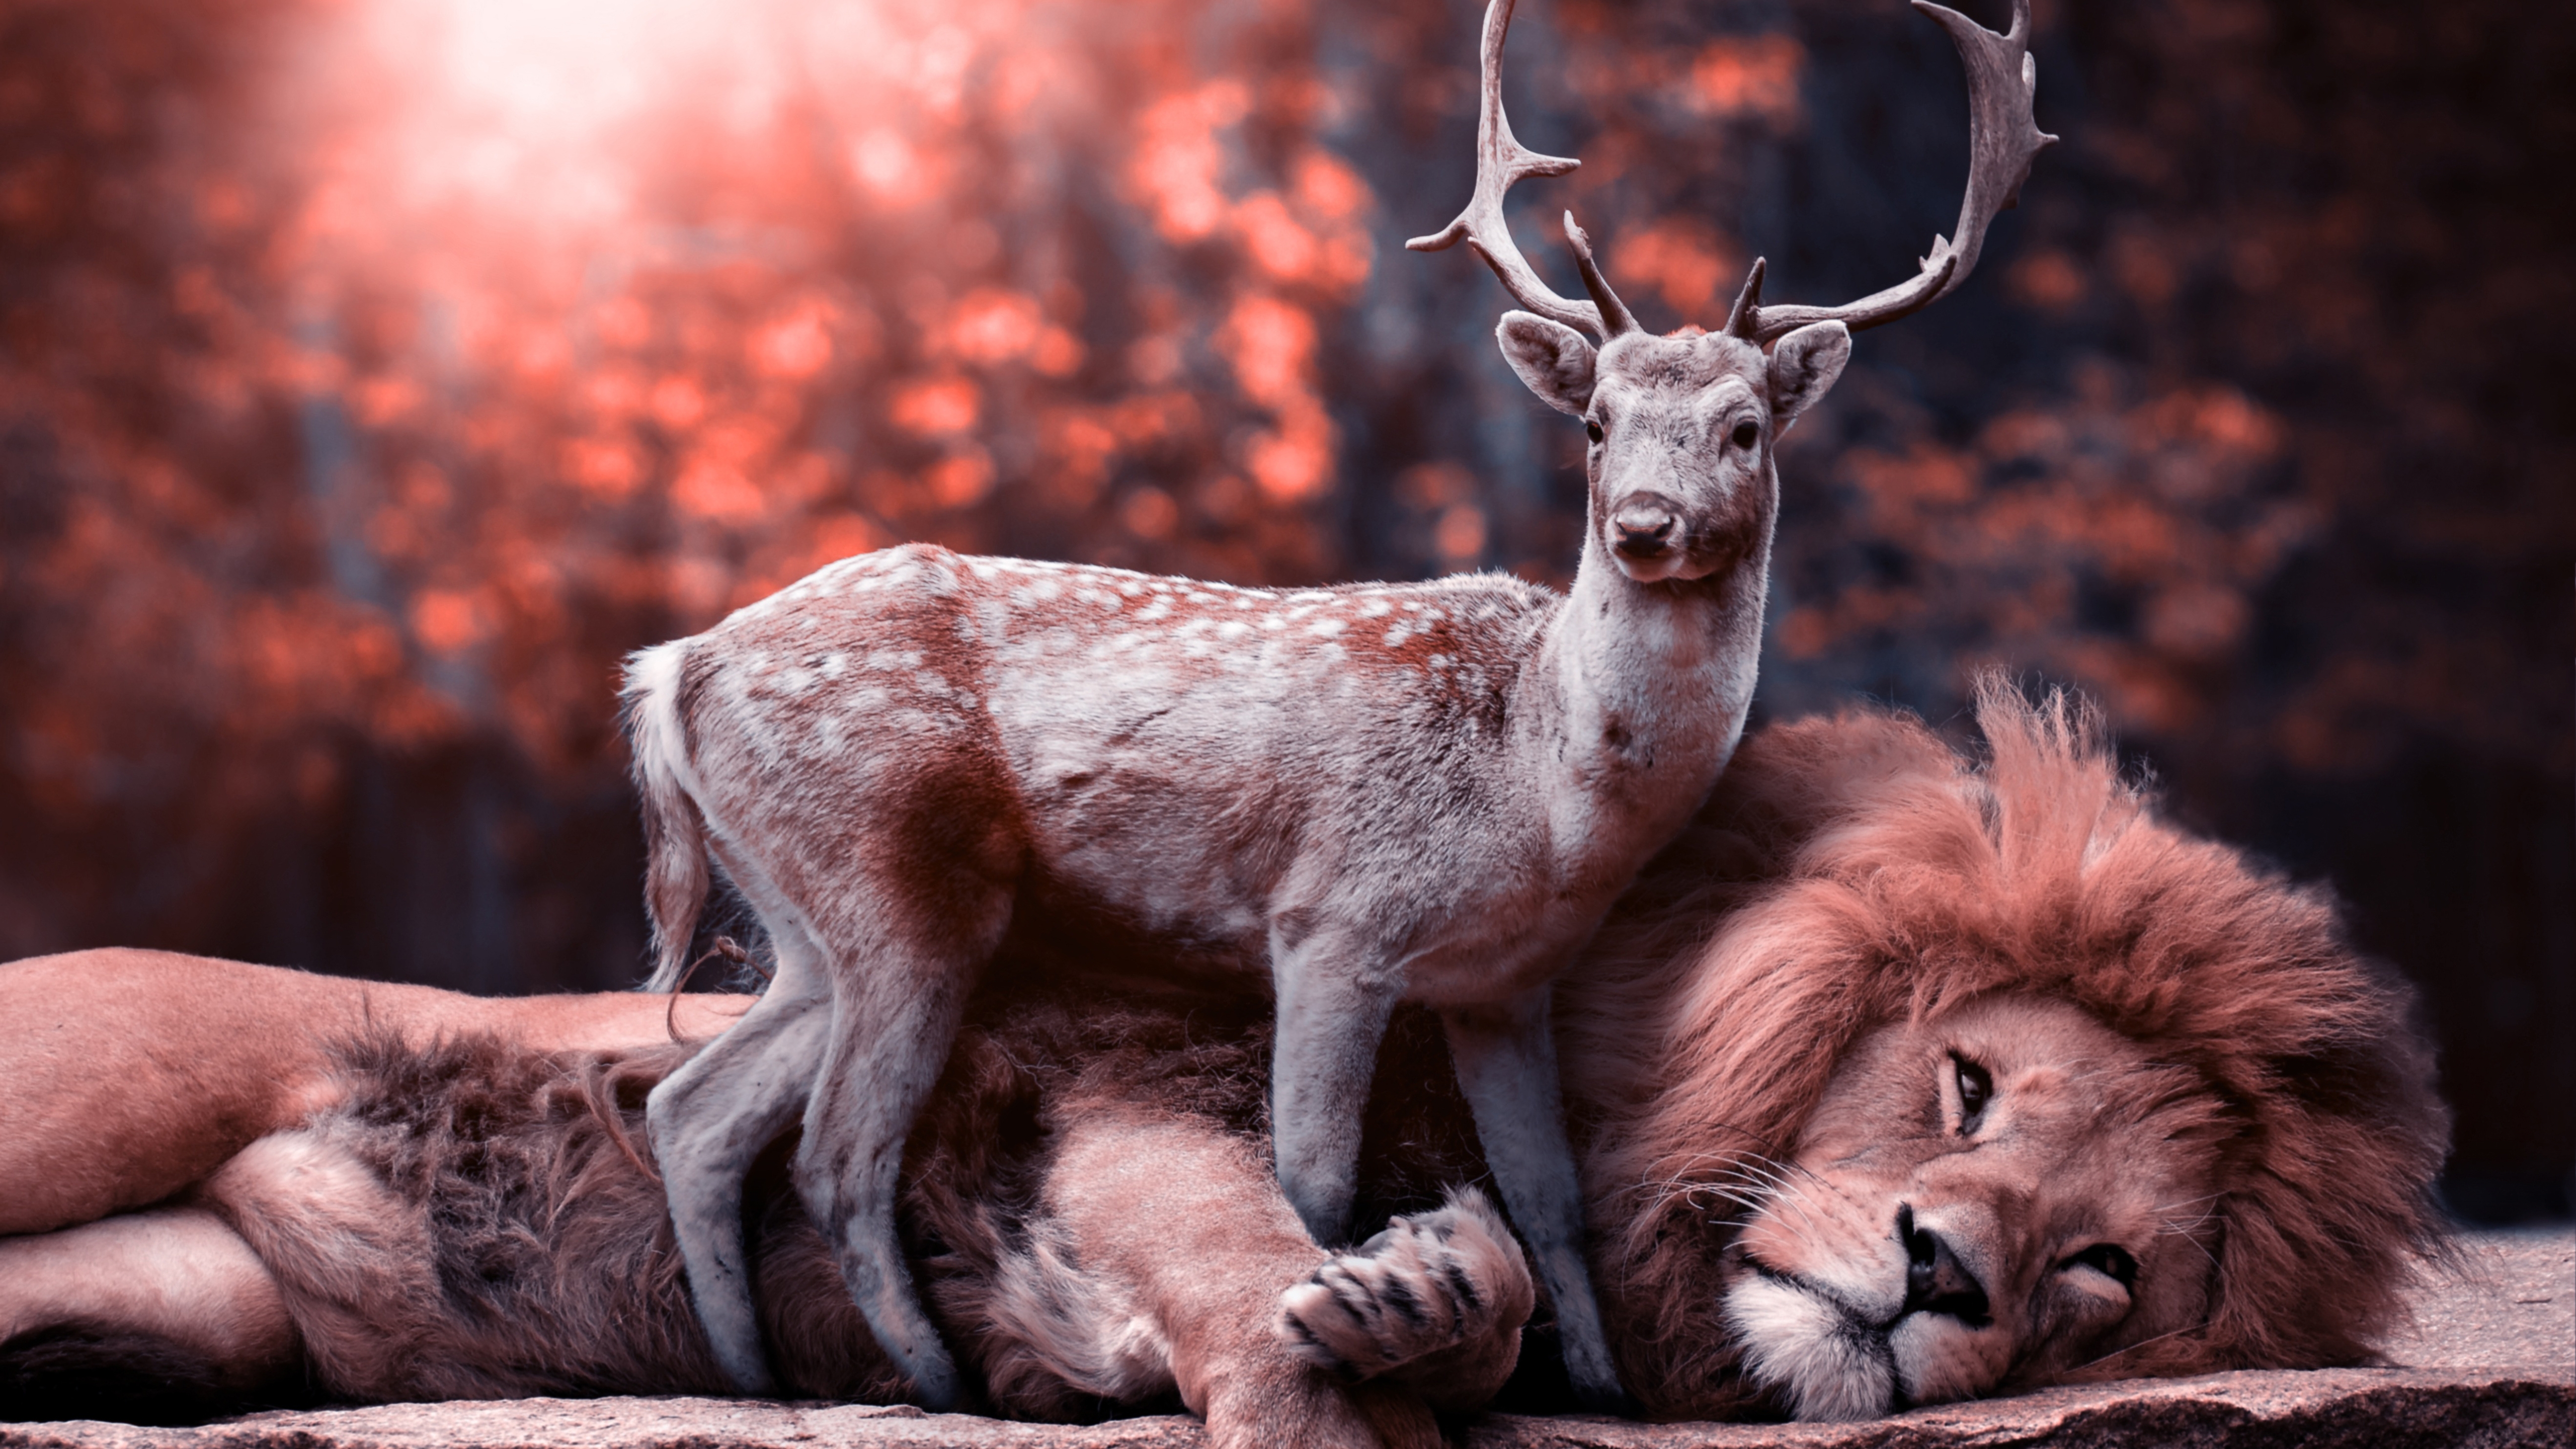 Wallpapers the deer and the lion friends wildlife on the desktop